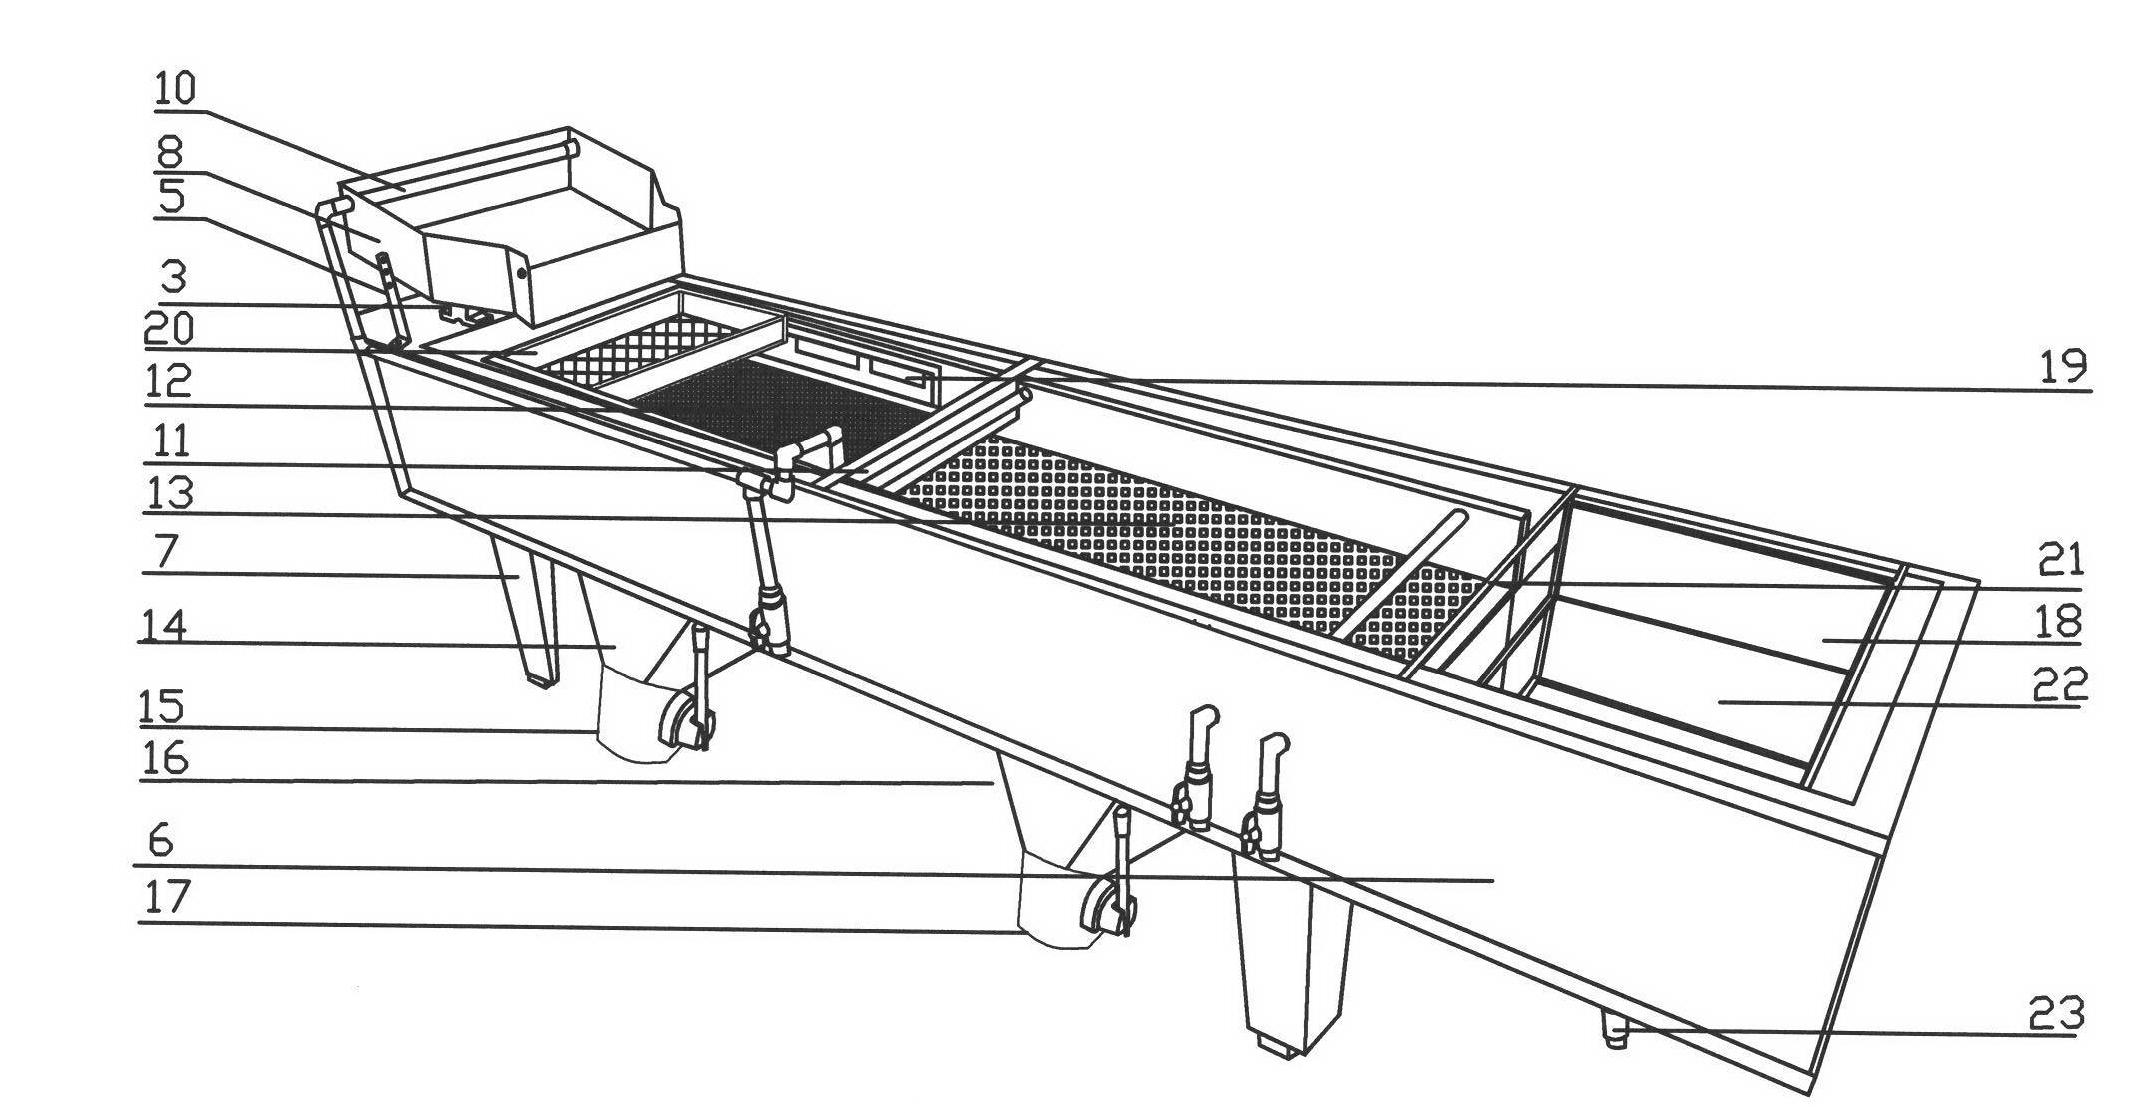 Scallop seed screening device